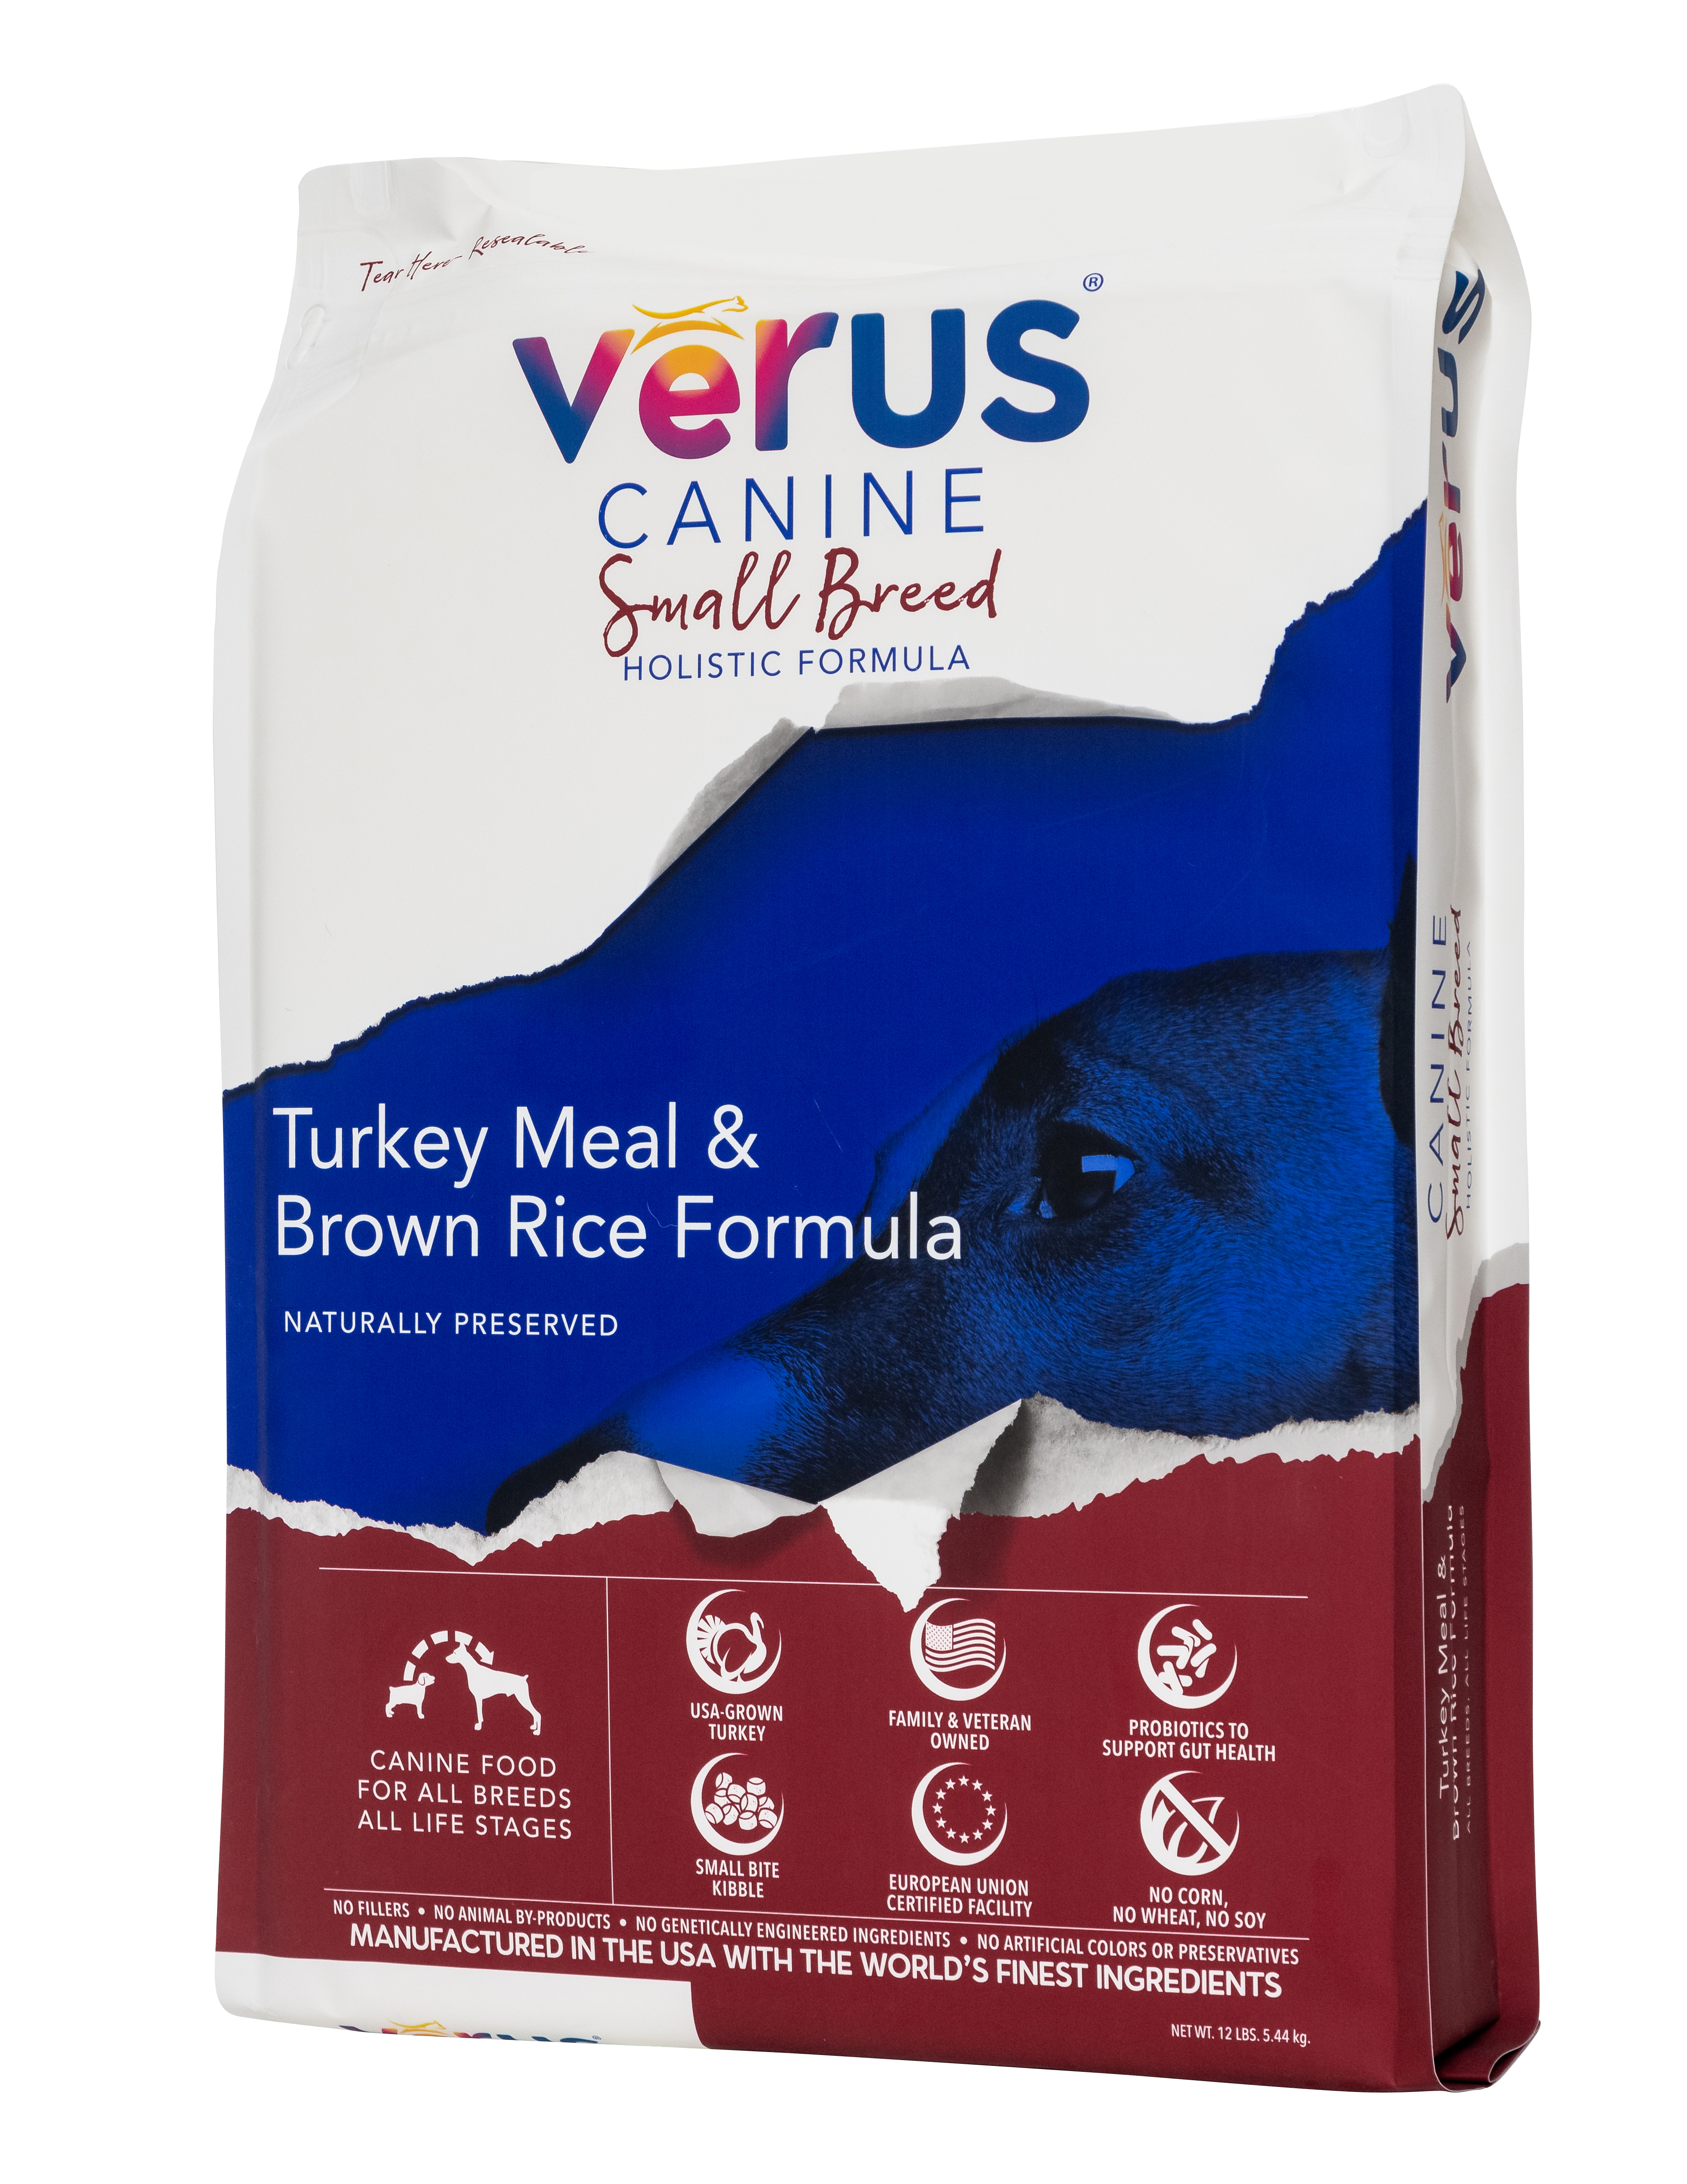 Verus Canine Small Breed Turkey Meal & Brown Rice Formula Dry Dog Food